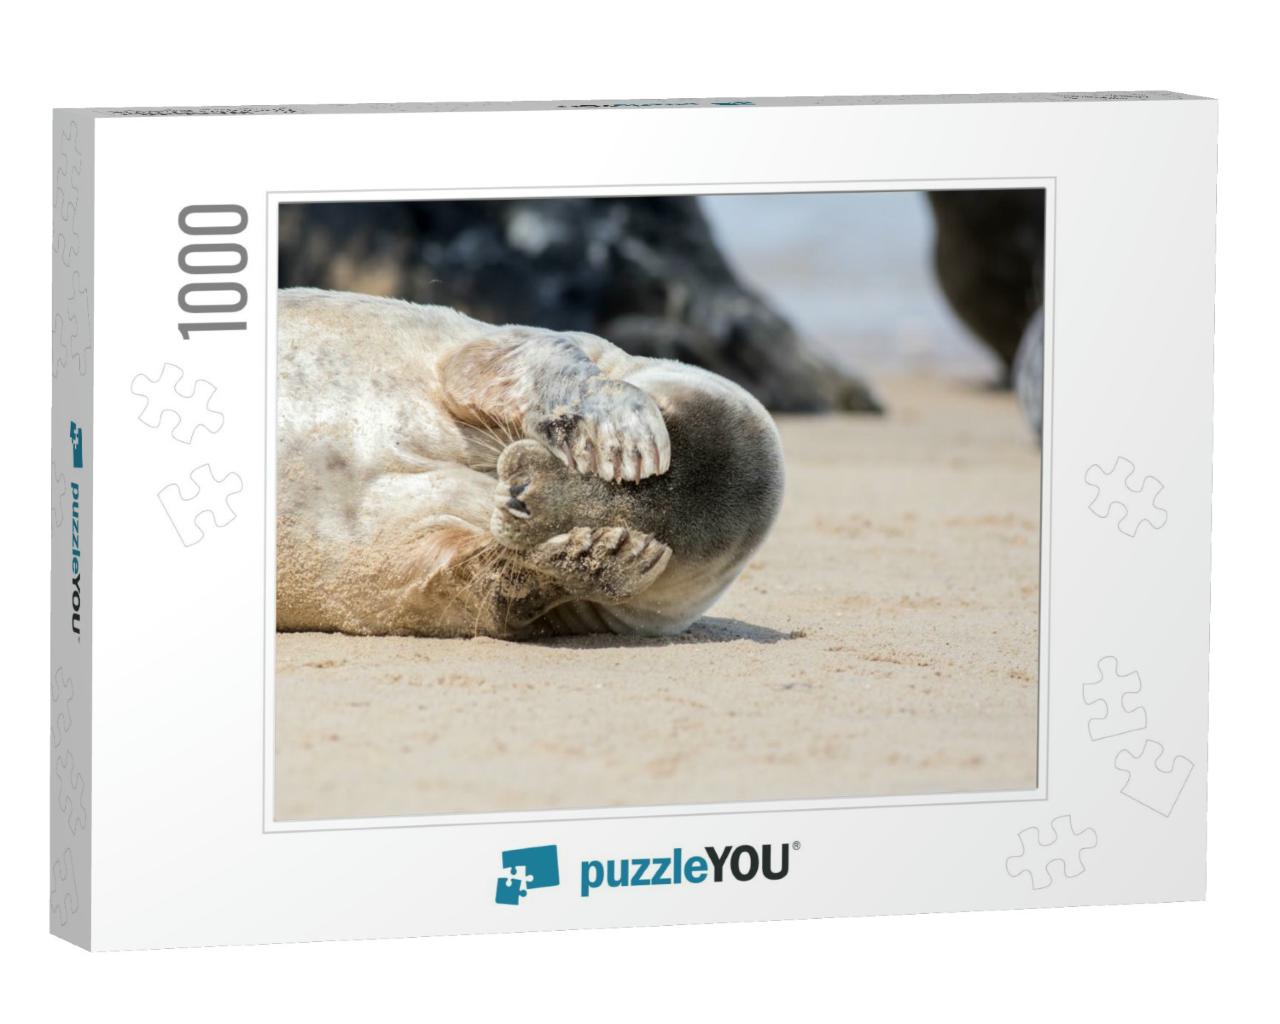 Peekaboo. Cute Seal Covering Its Eyes. Funny Animal Meme... Jigsaw Puzzle with 1000 pieces